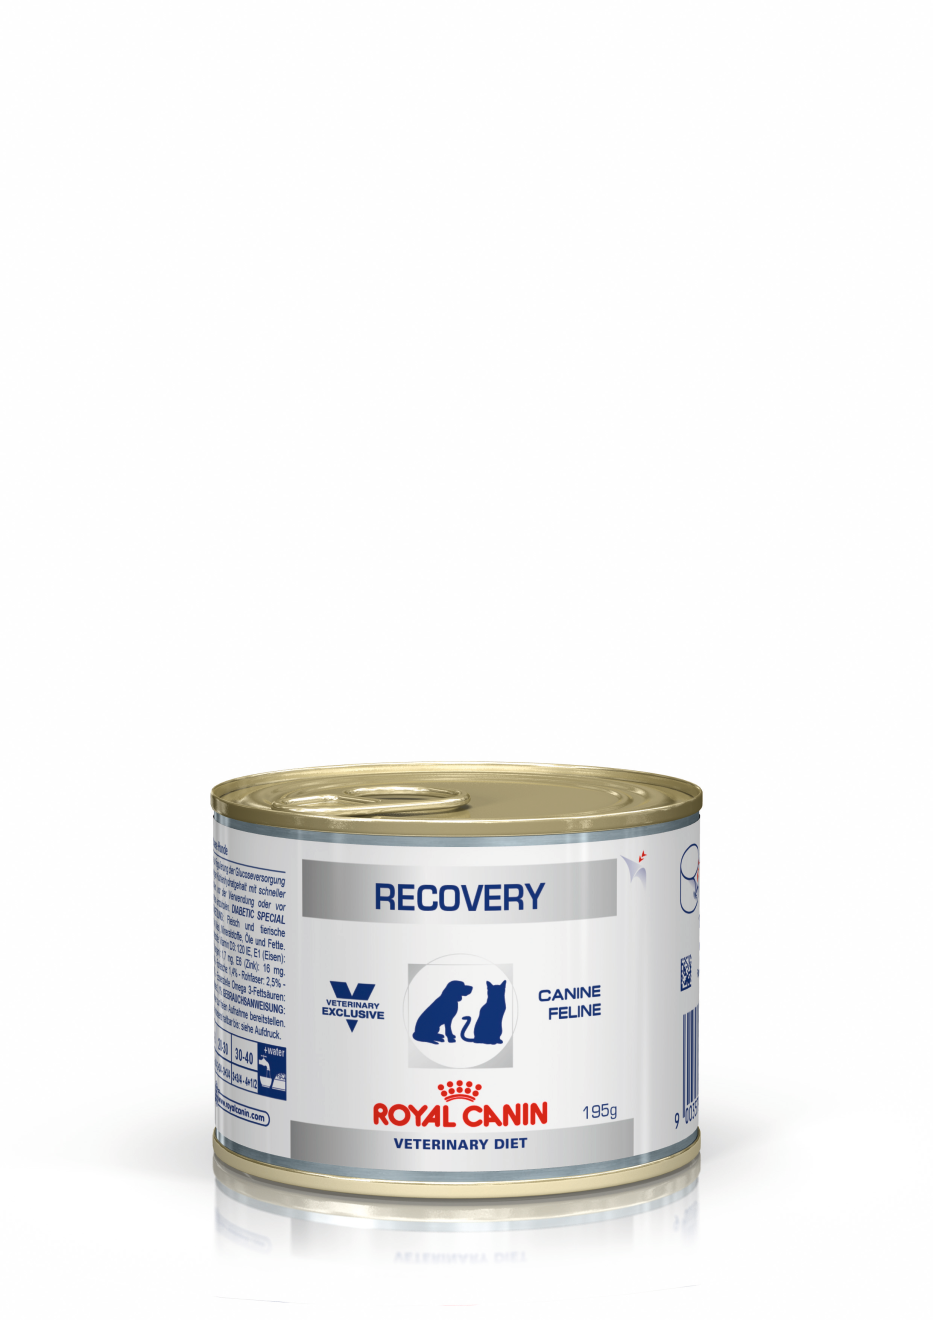 Royal Canin Recovery Cats/Dogs